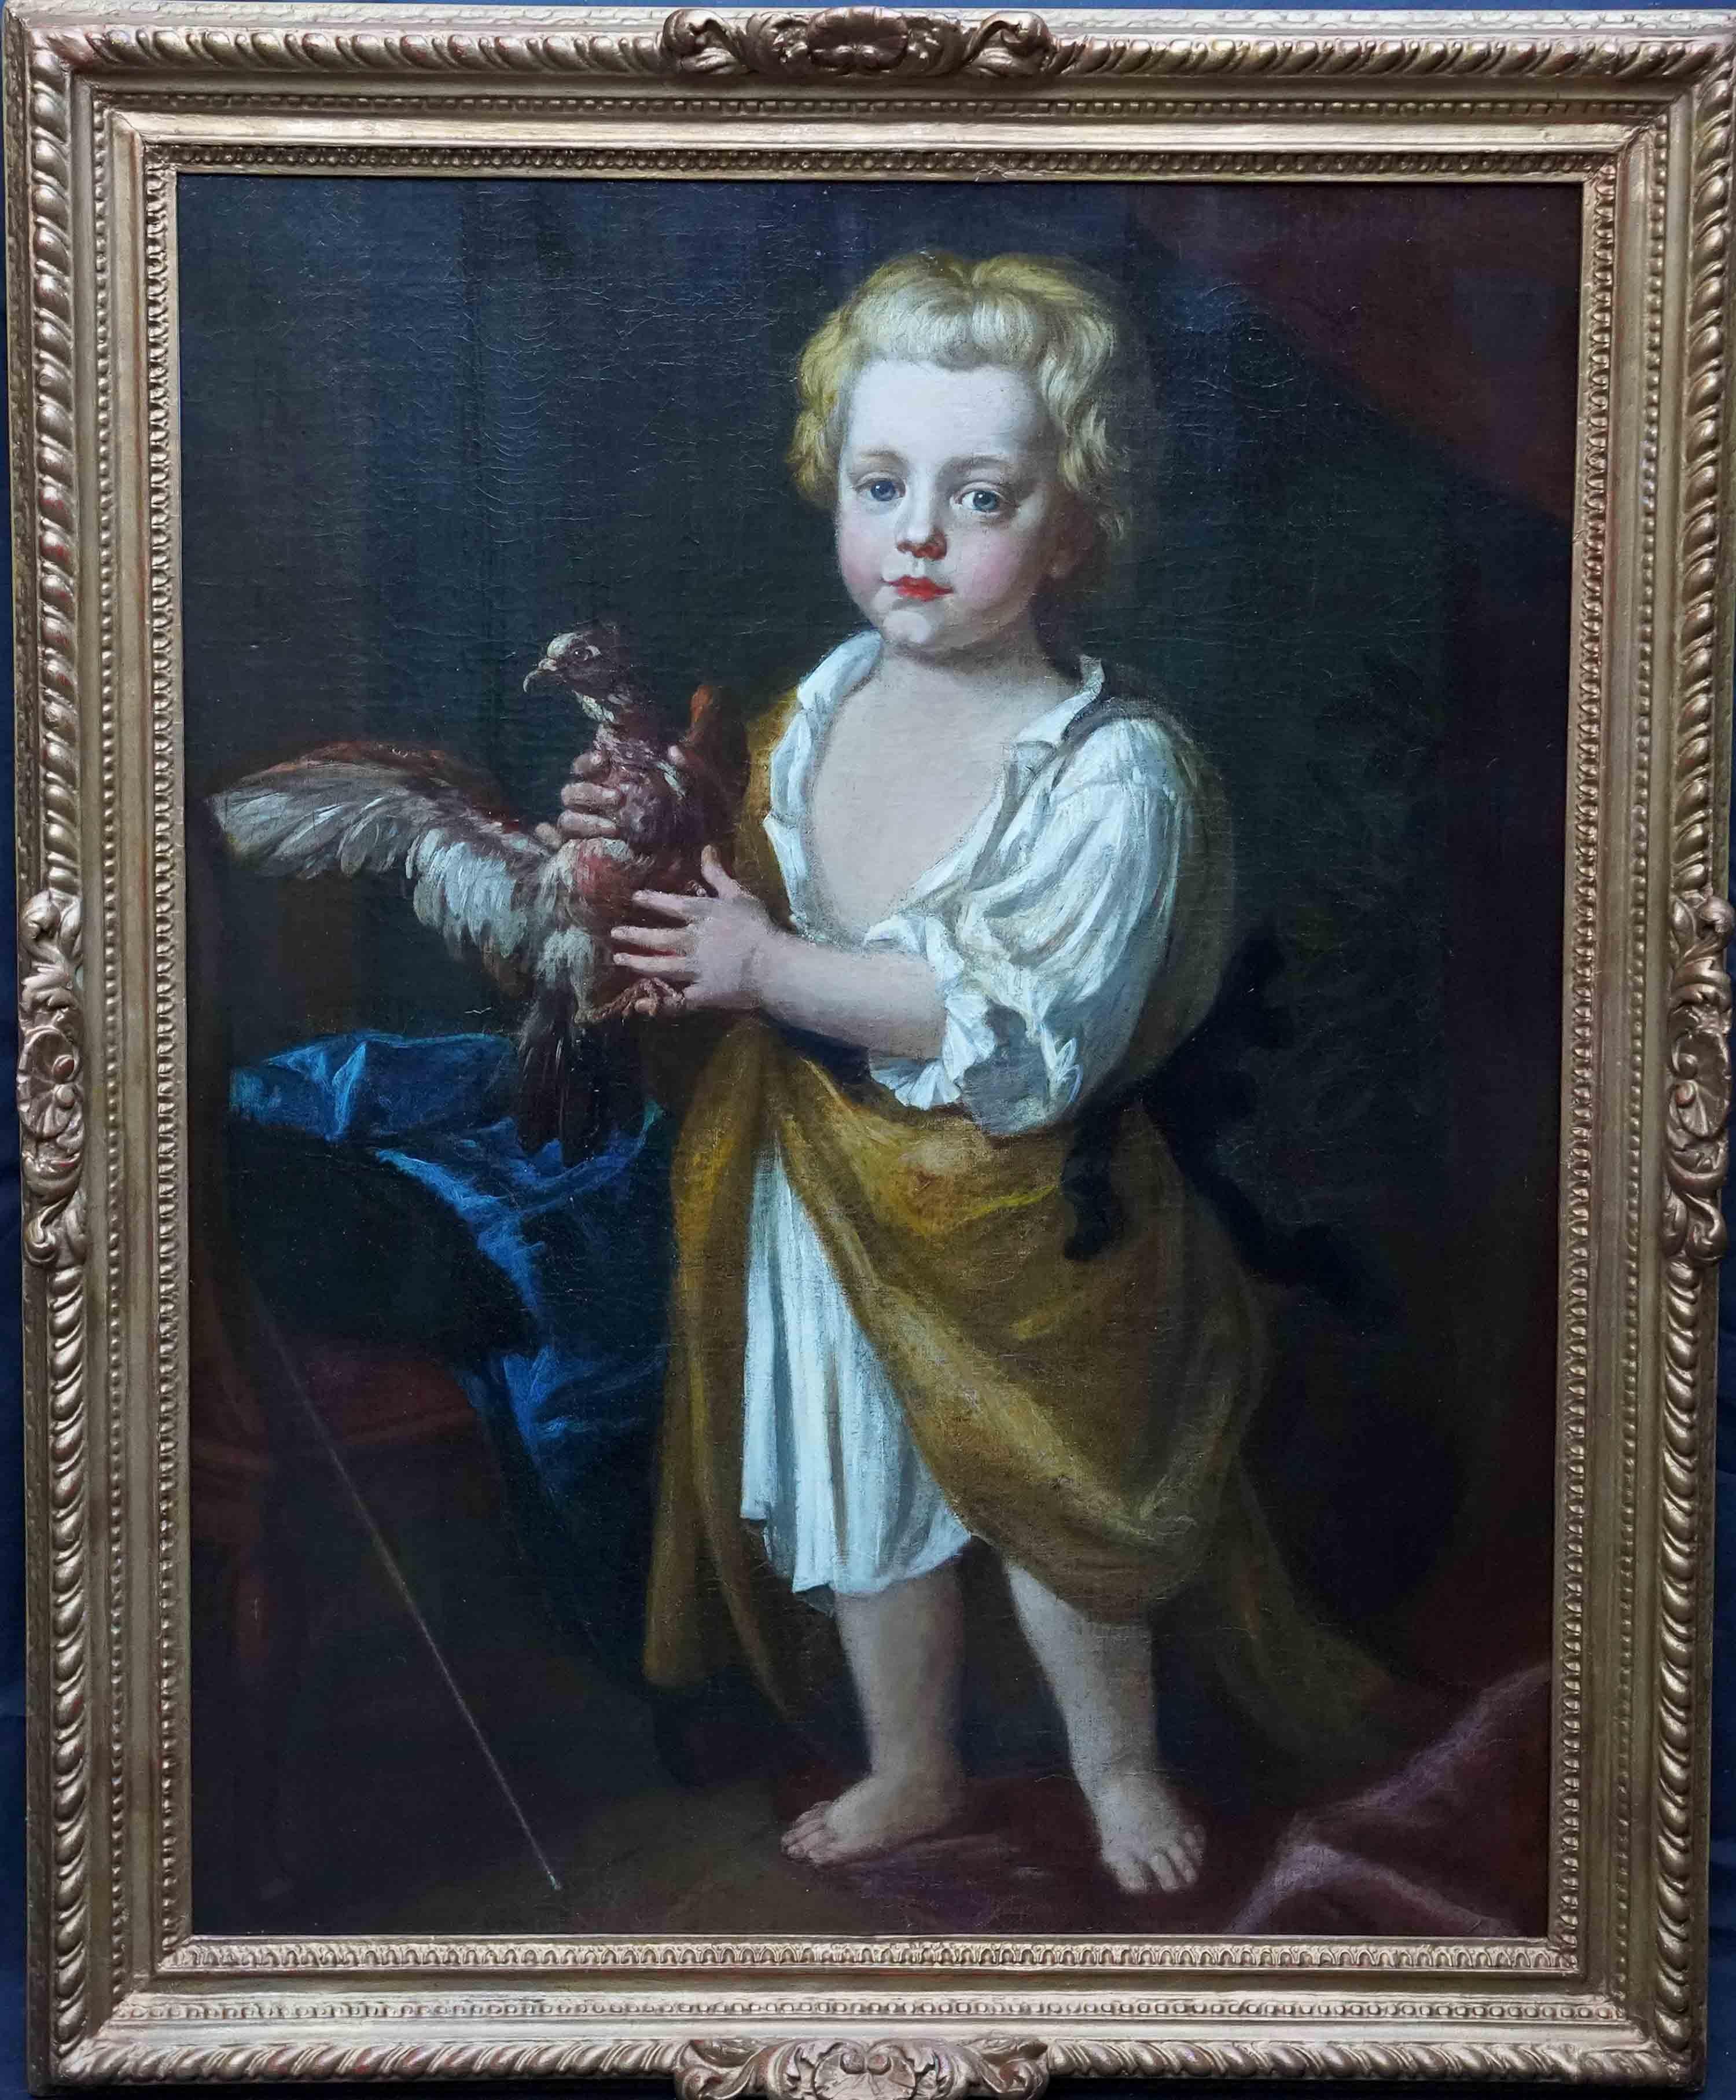 Portrait of a Boy with Bird - British 17th century art Old Master oil painting For Sale 7